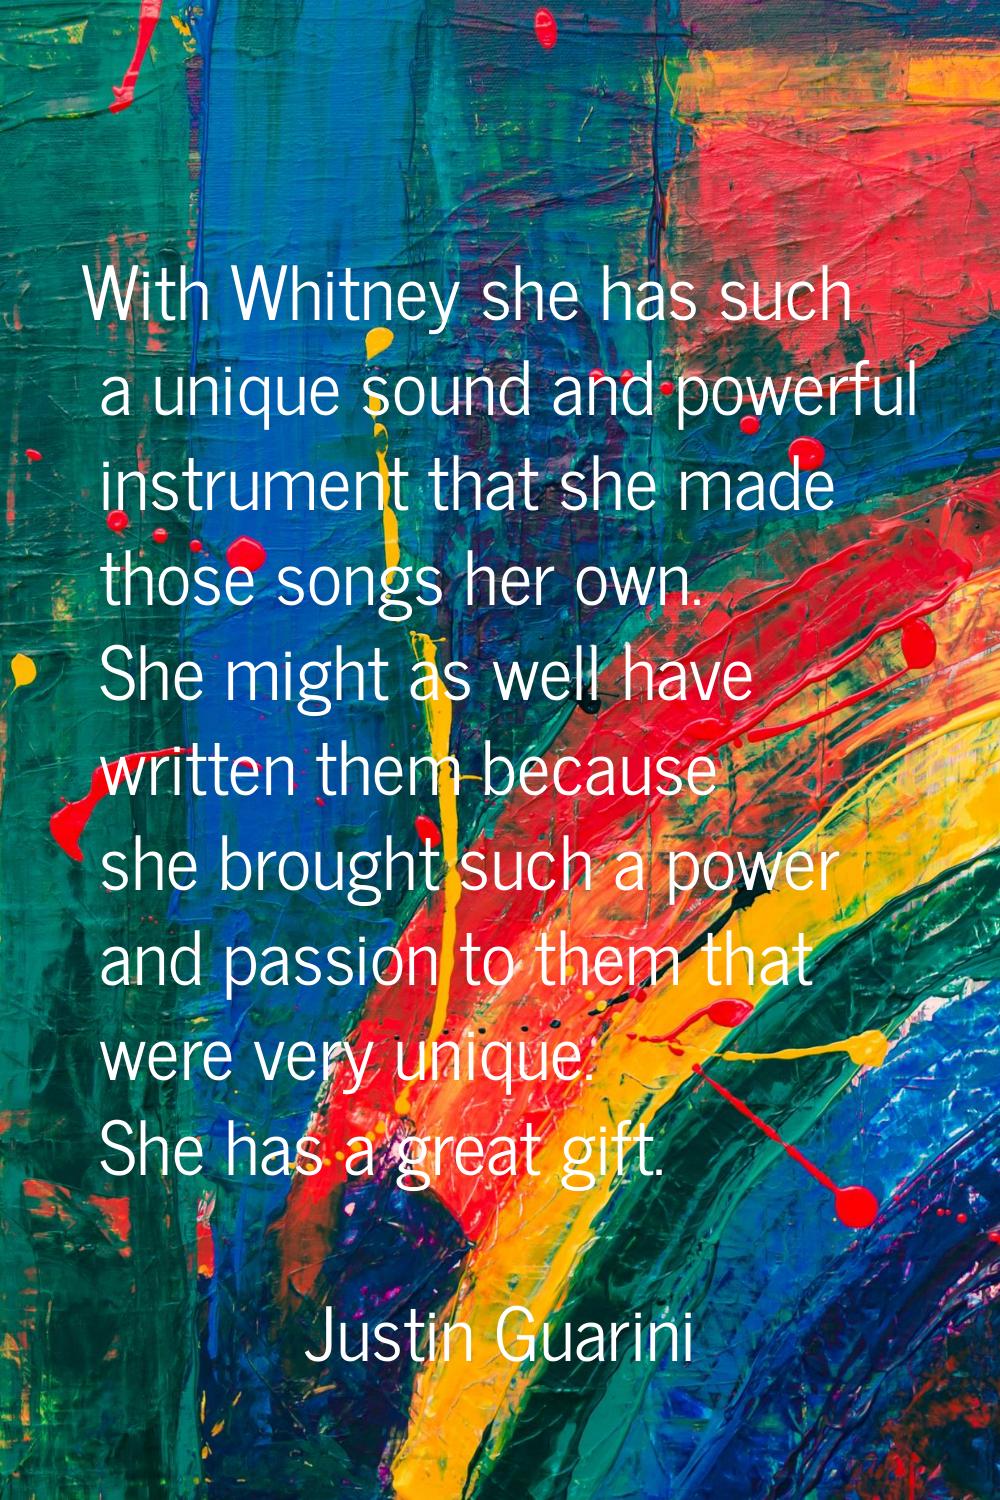 With Whitney she has such a unique sound and powerful instrument that she made those songs her own.